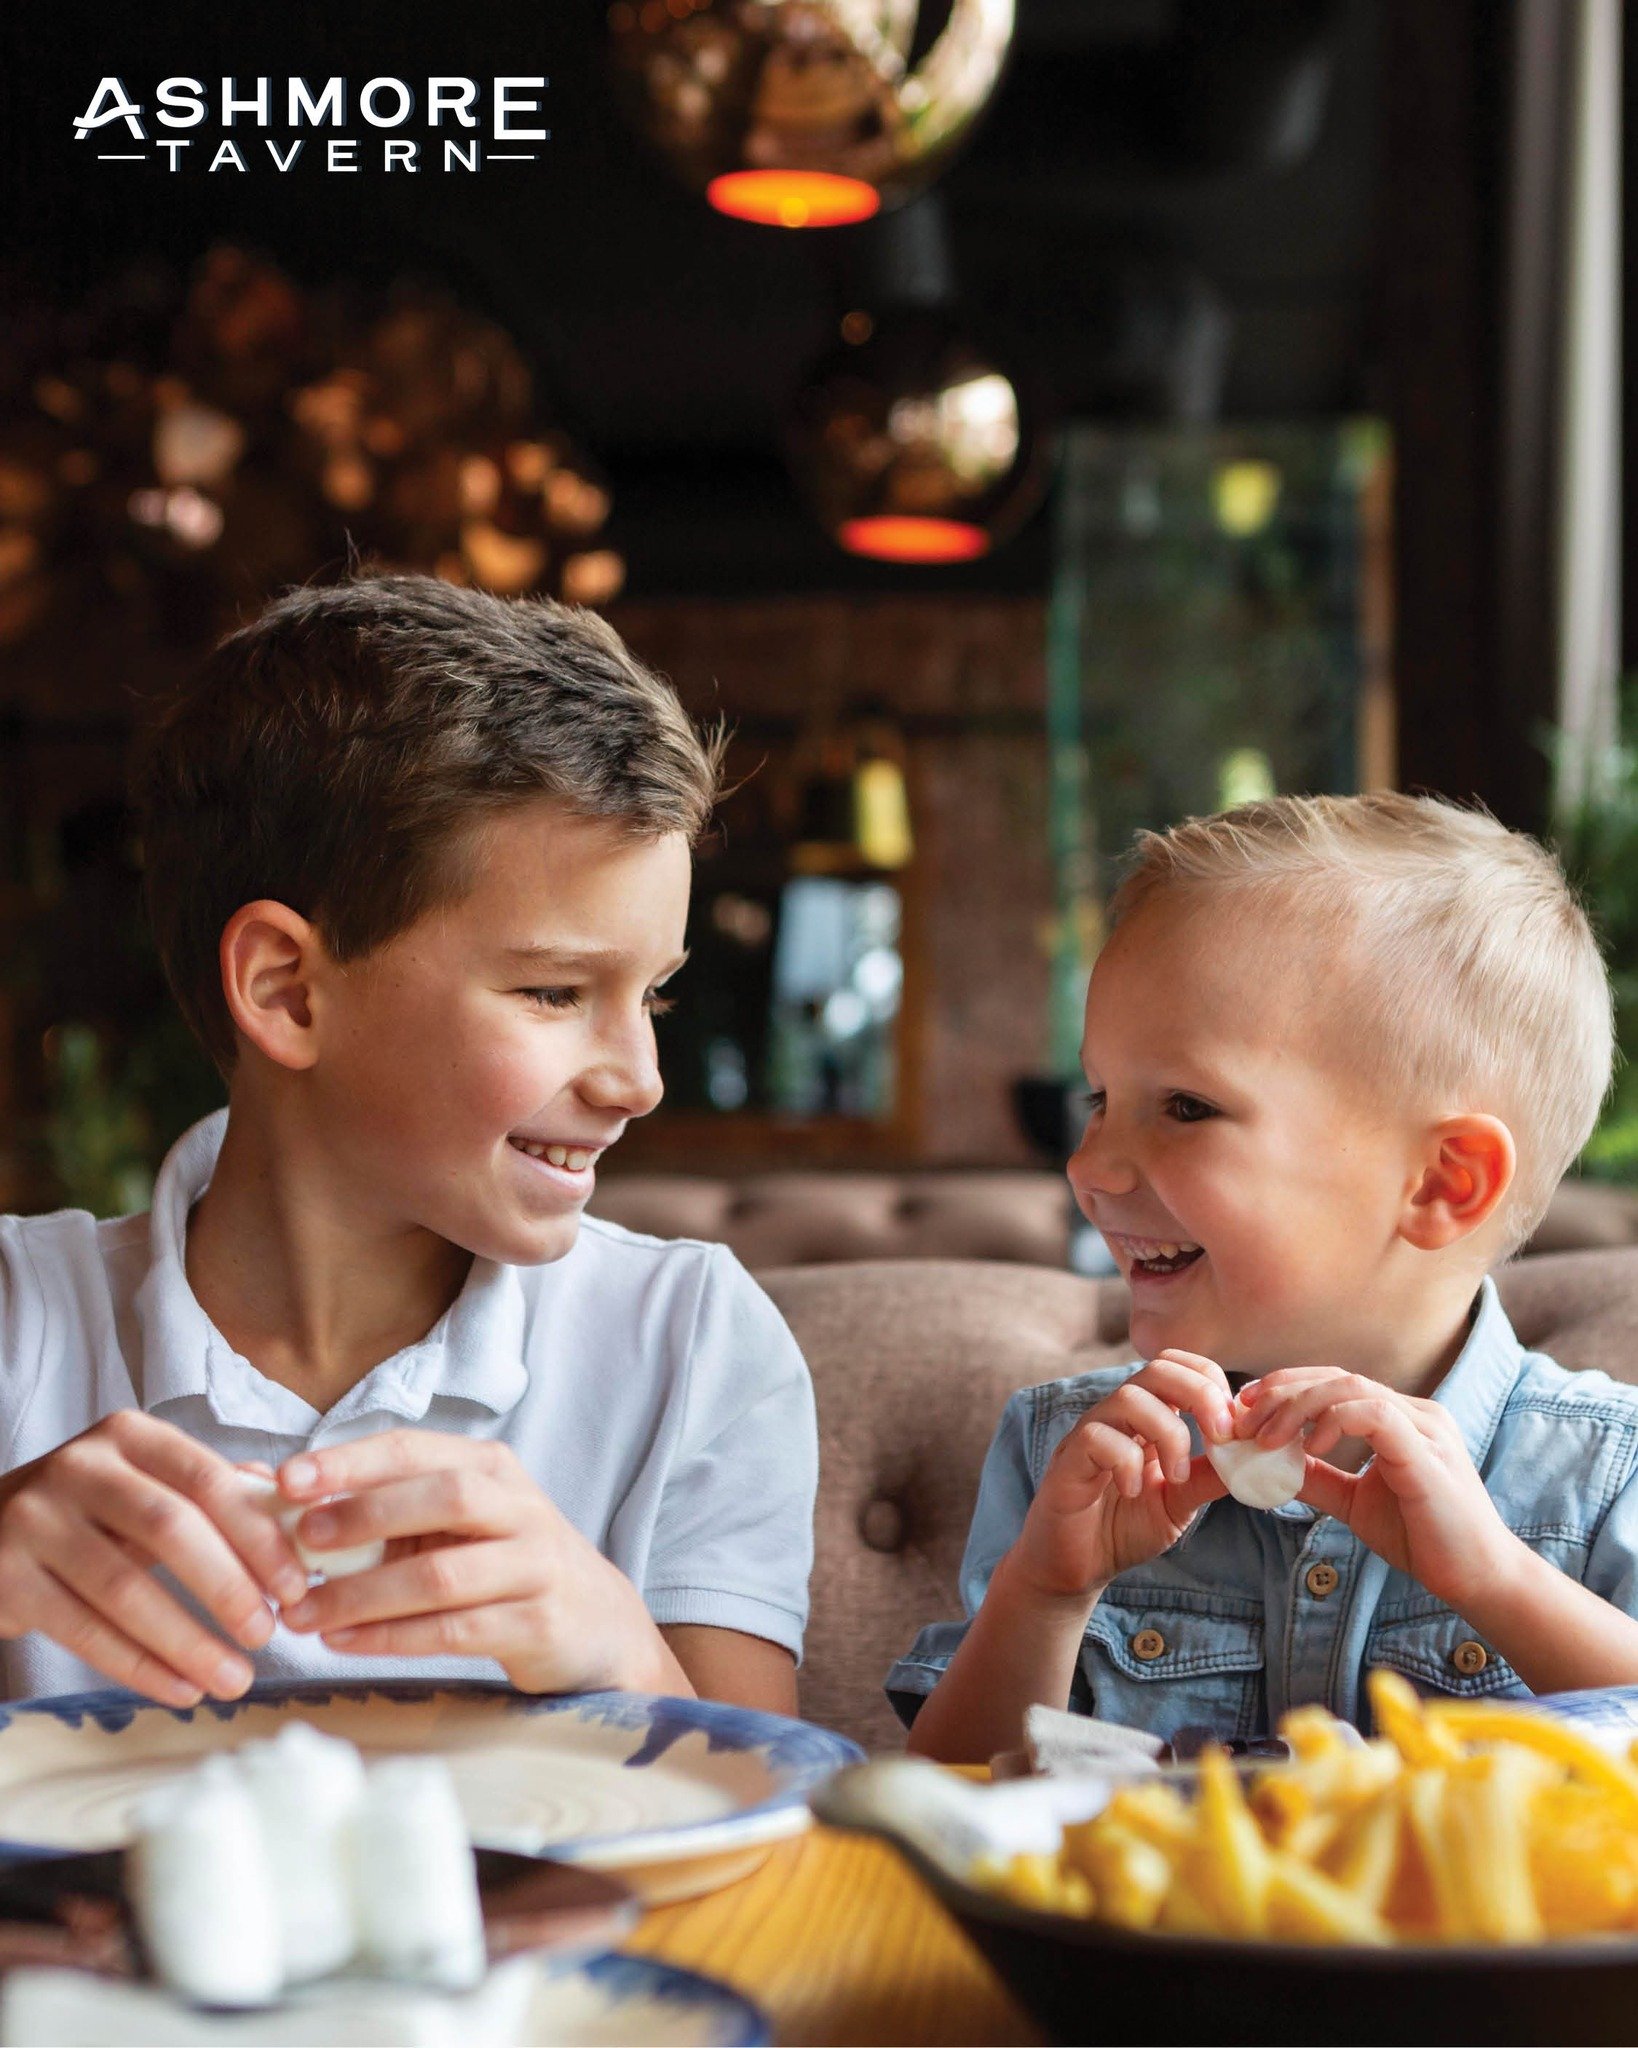 Treat your little ones and enjoy a stress-free family dinner with our Kids Eat Free special EVERY Wednesday Night! 👪🍽

Enjoy a complimentary kid&rsquo;s meal with the purchase of any main meal! 🍕🍔

Available between 5:30pm to 8:30pm 

Book a tabl